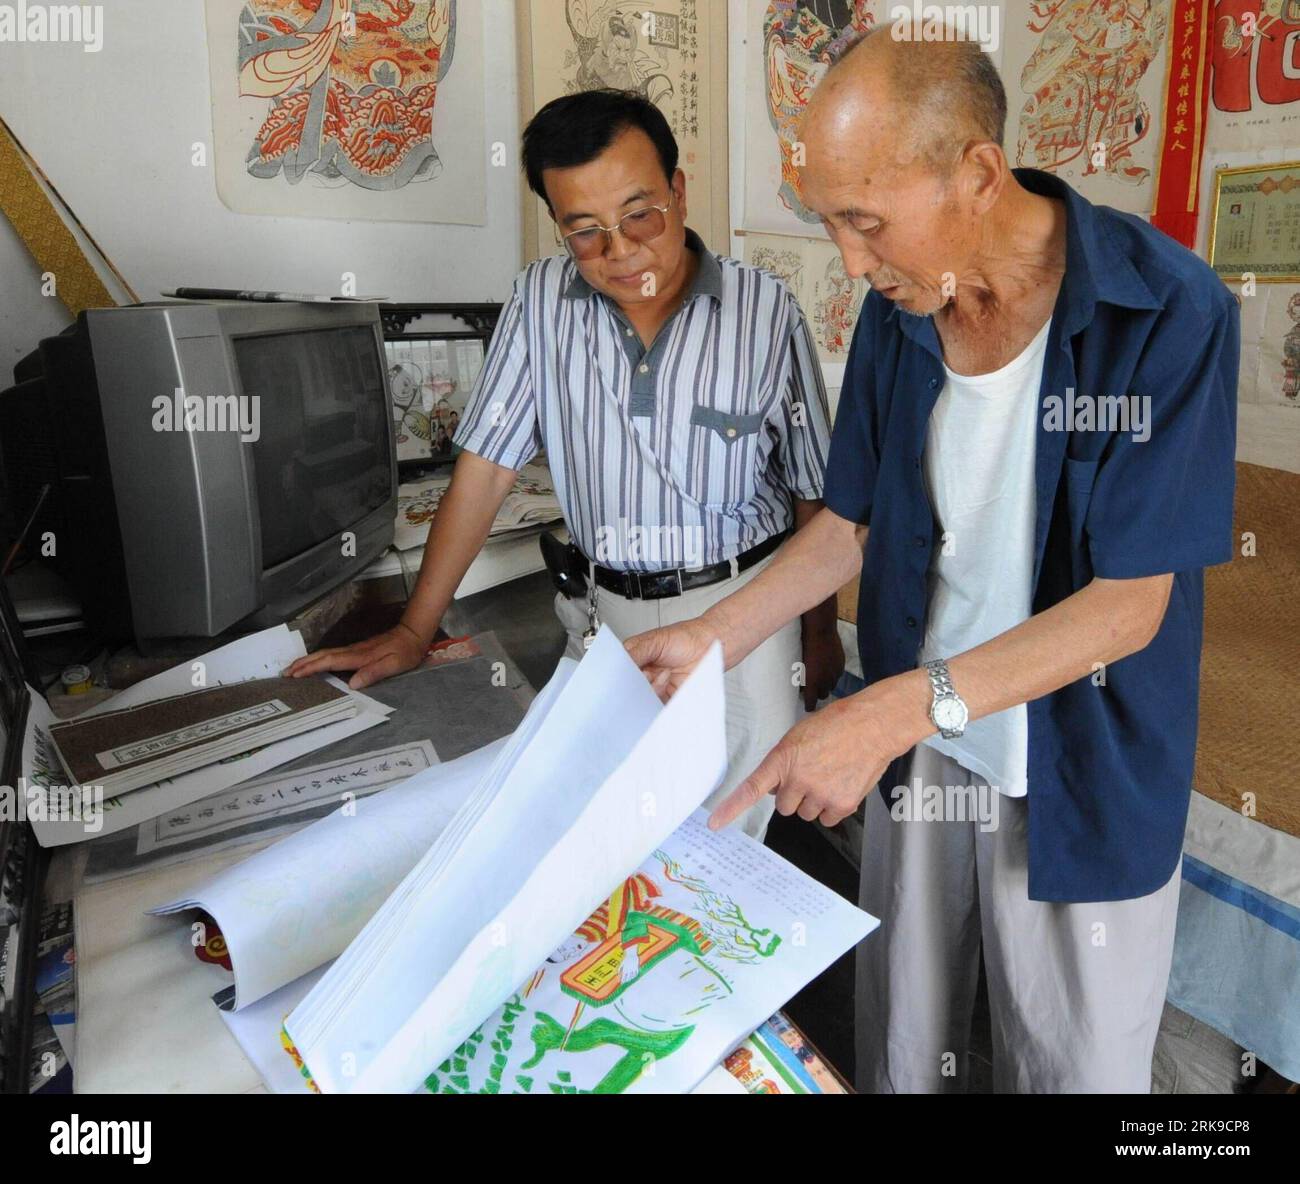 Bildnummer: 54168698  Datum: 24.06.2010  Copyright: imago/Xinhua Xi an, June 24, 2010 (Xinhua) -- Folk artist Tai Yu (R) shows his woodcut prints painting book at his studio in Fengxiang County of Baoji City, northwest China s Shaanxi Province, June 24, 2010. The 77 years old folk artist Tai Yu learnt the skills of making spring festival woodcut prints when he was a kid. Through his more than 60 years practices in woodcut prints Tai inherited traditional skills from ancestor artists and drew inspirations form stone carving, paper-cutting, and embroidering and formed his own style. His woodcut Stock Photo